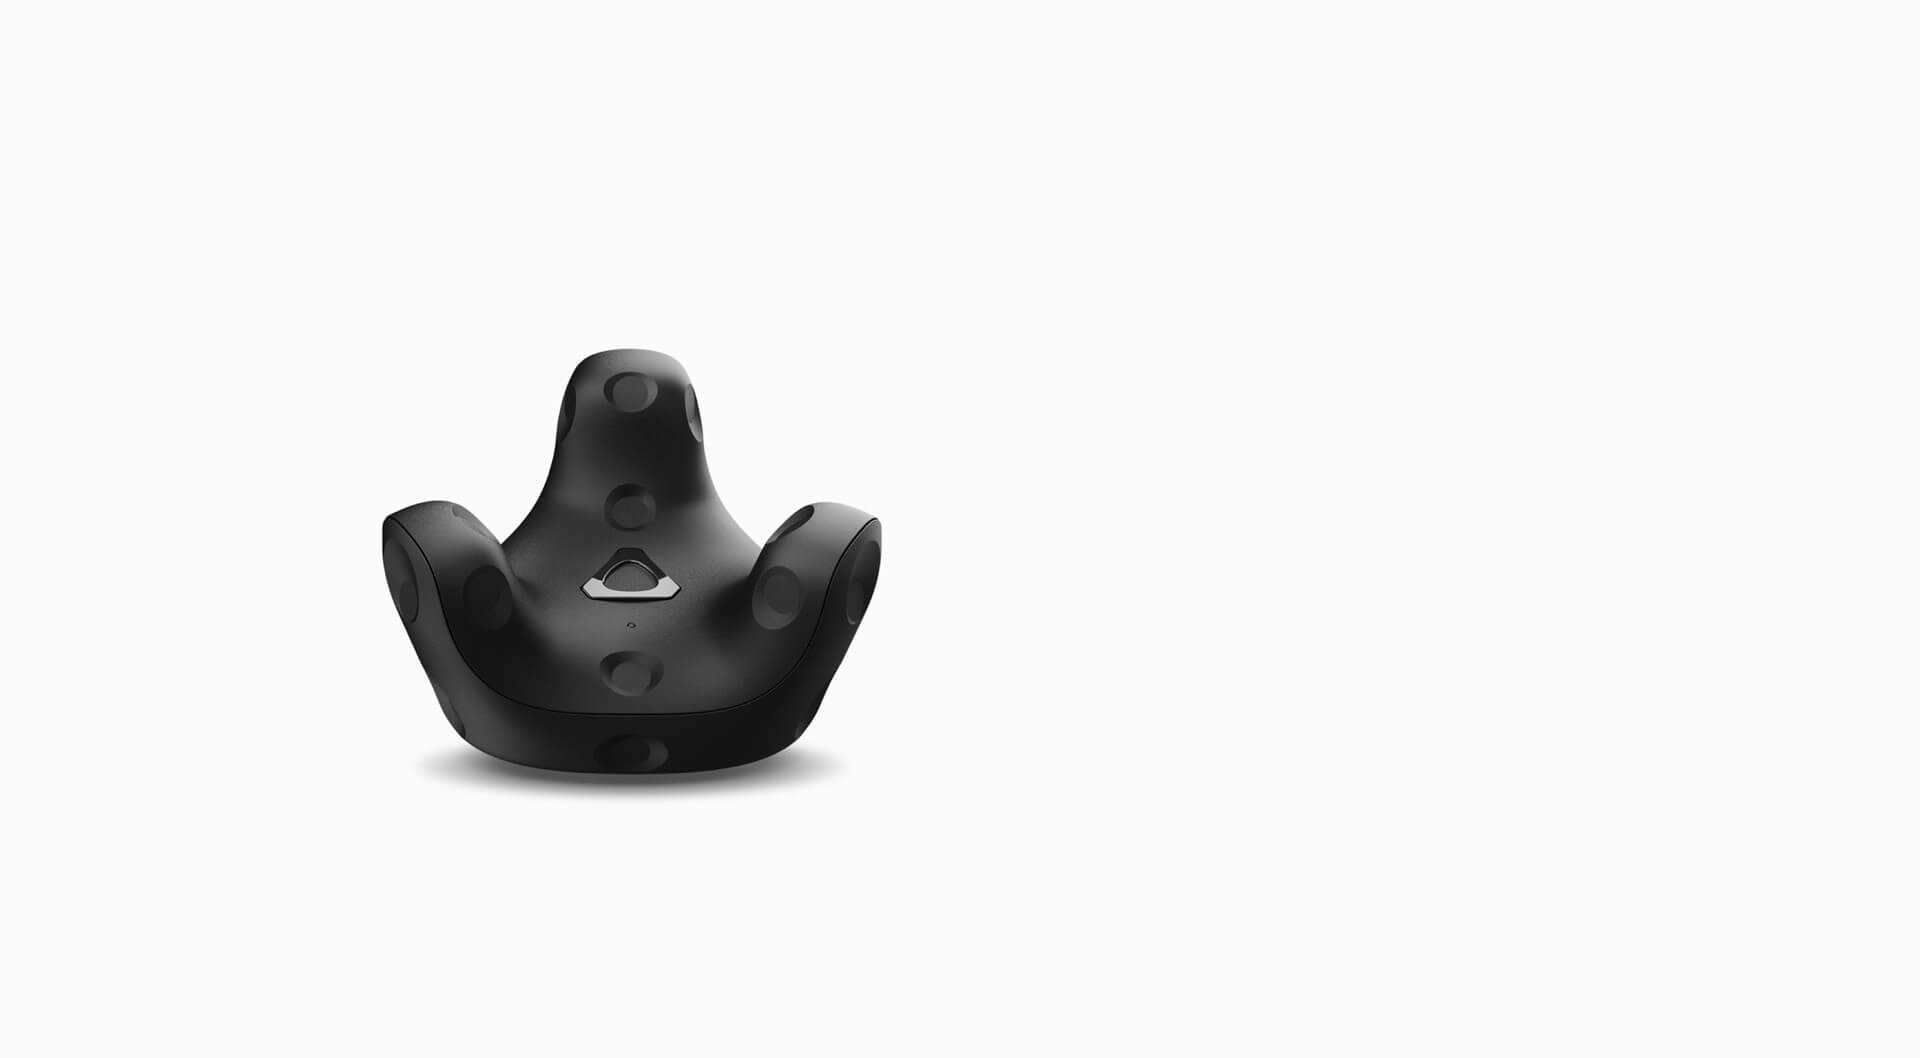 htc vive tracker 3.0 angled on white background